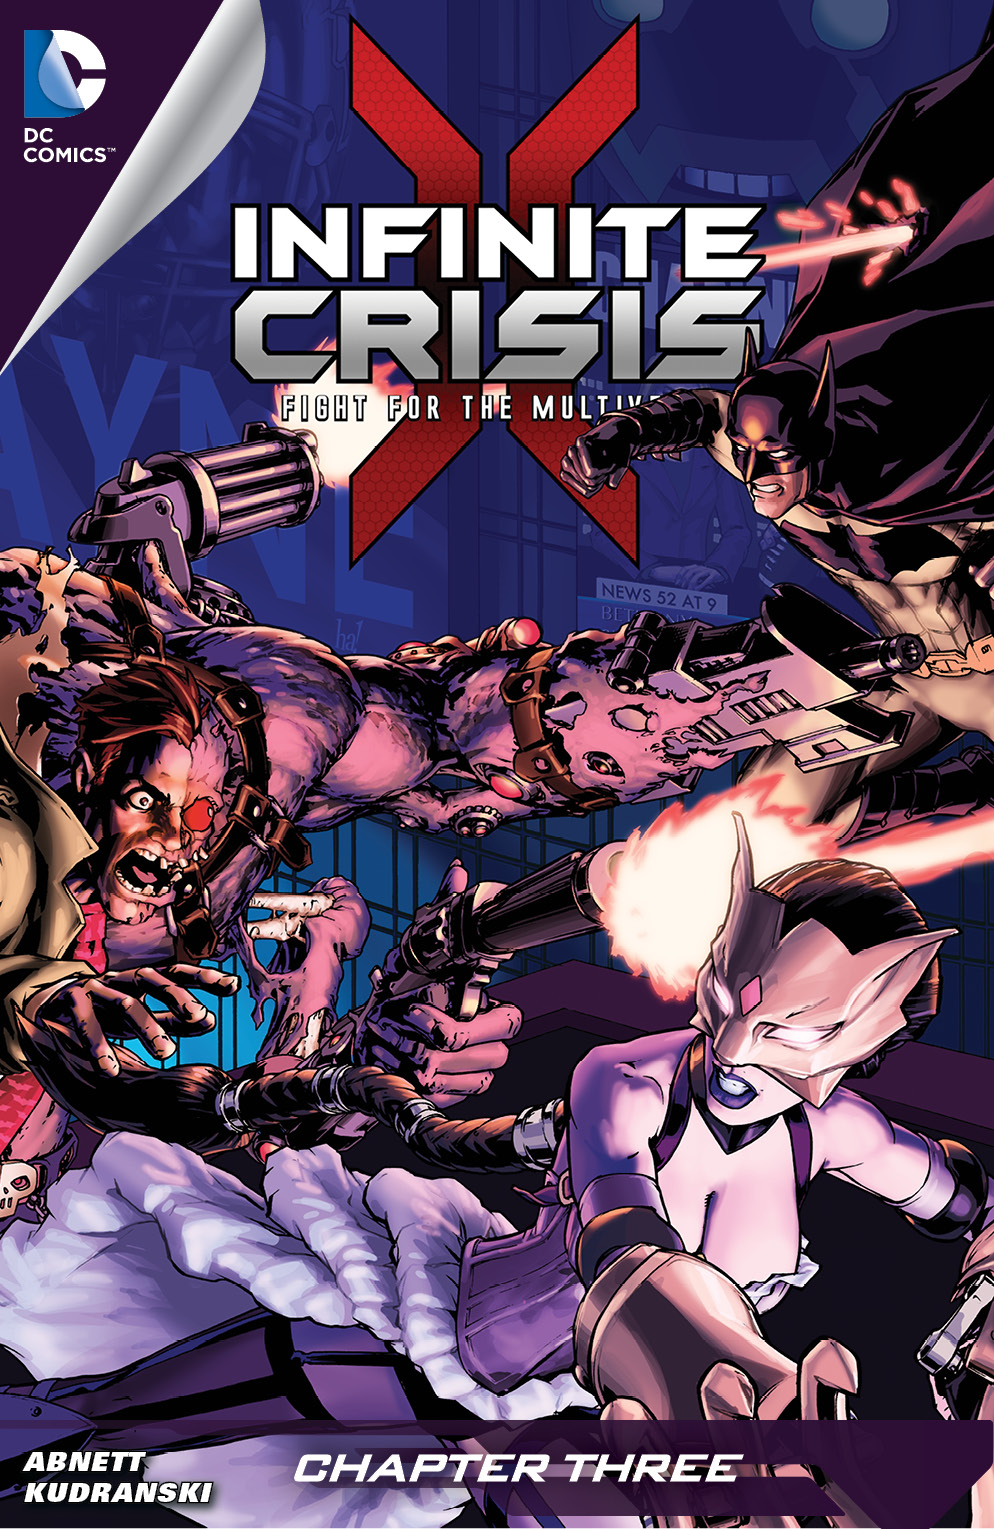 Infinite Crisis: Fight for the Multiverse #3 preview images